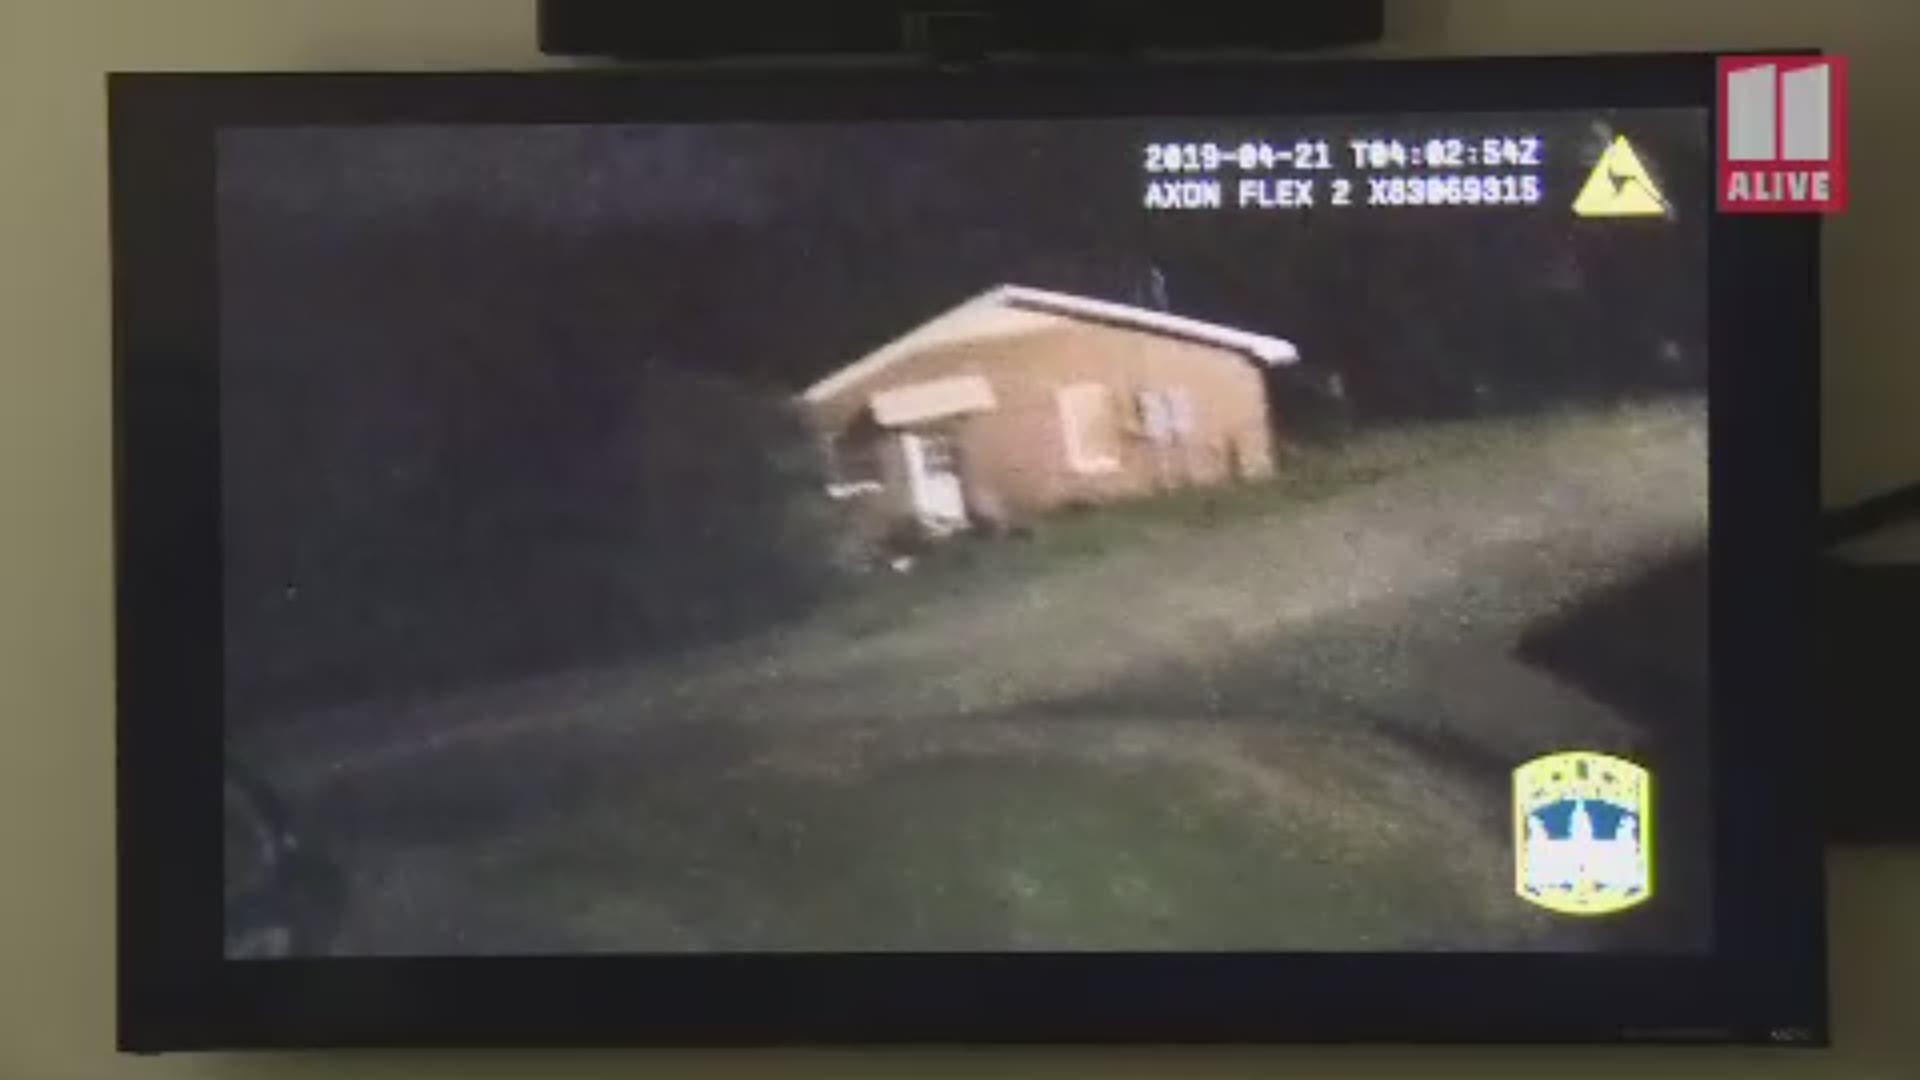 Athens-Clarke County Police released bodycam video of a deadly officer-involved shooting that left an alleged 'peeping Tom' suspect dead in March.